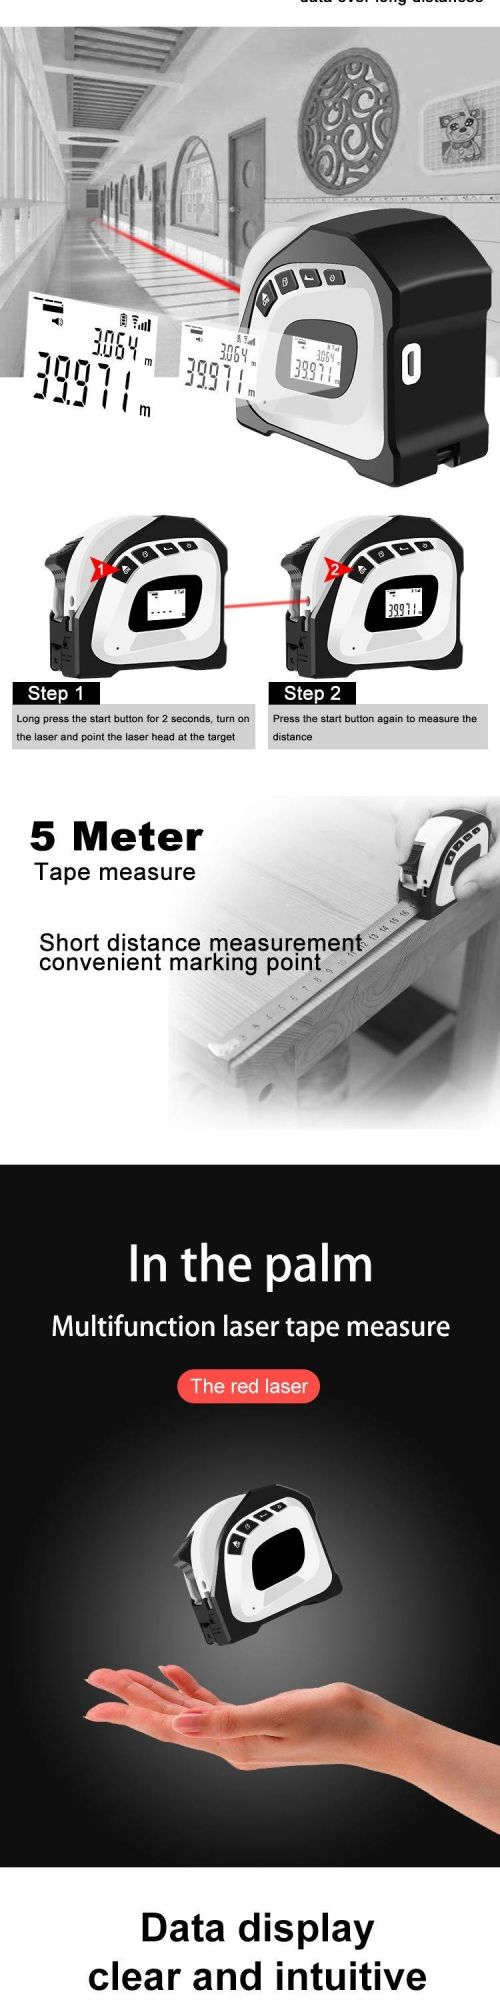 40m Smart Infrared Laser Tape Measure 2 in 1 Promotional